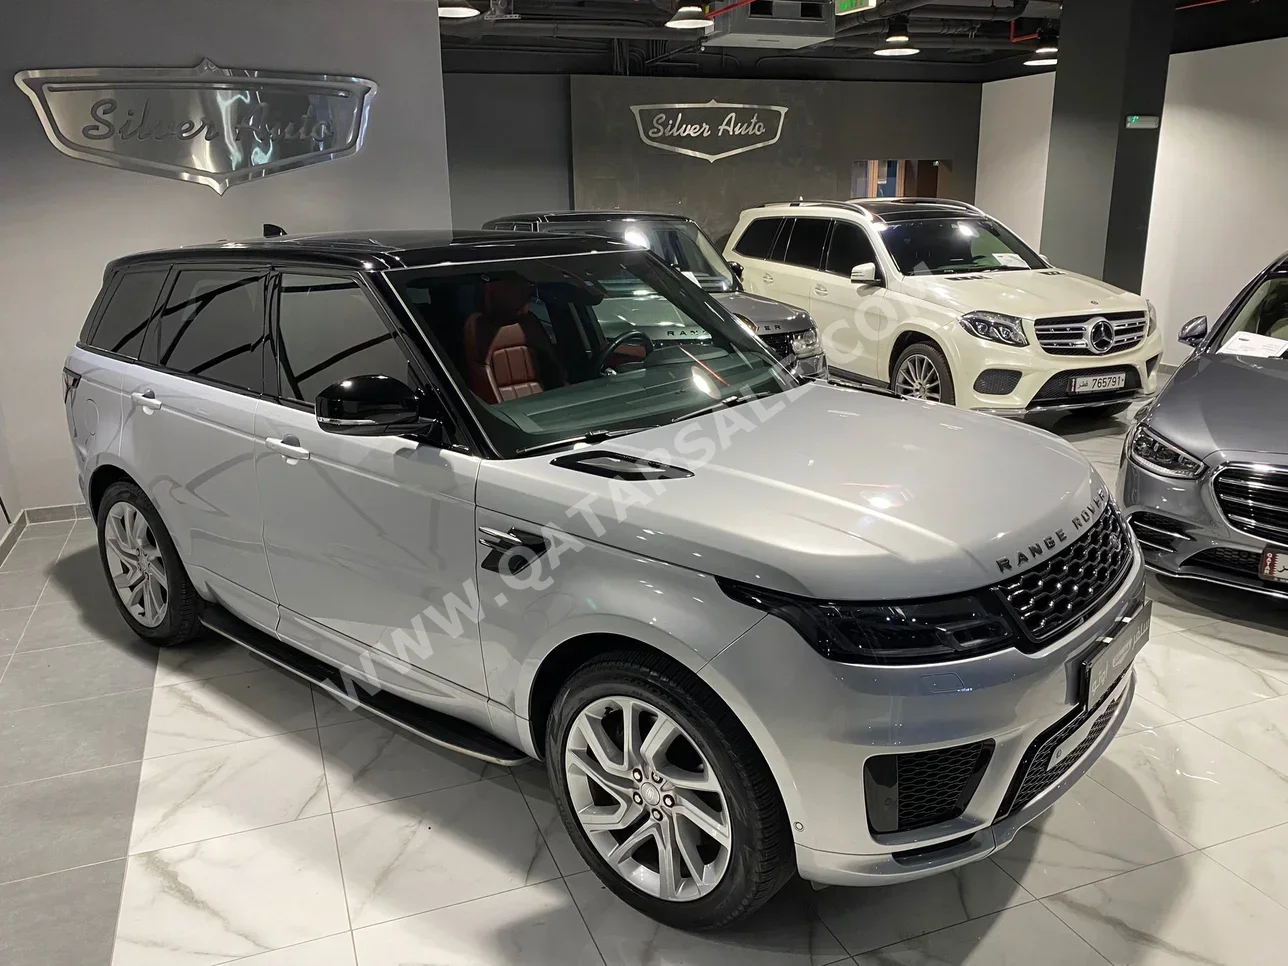 Land Rover  Range Rover  Sport HSE  2022  Automatic  16٬000 Km  6 Cylinder  Four Wheel Drive (4WD)  SUV  Silver  With Warranty